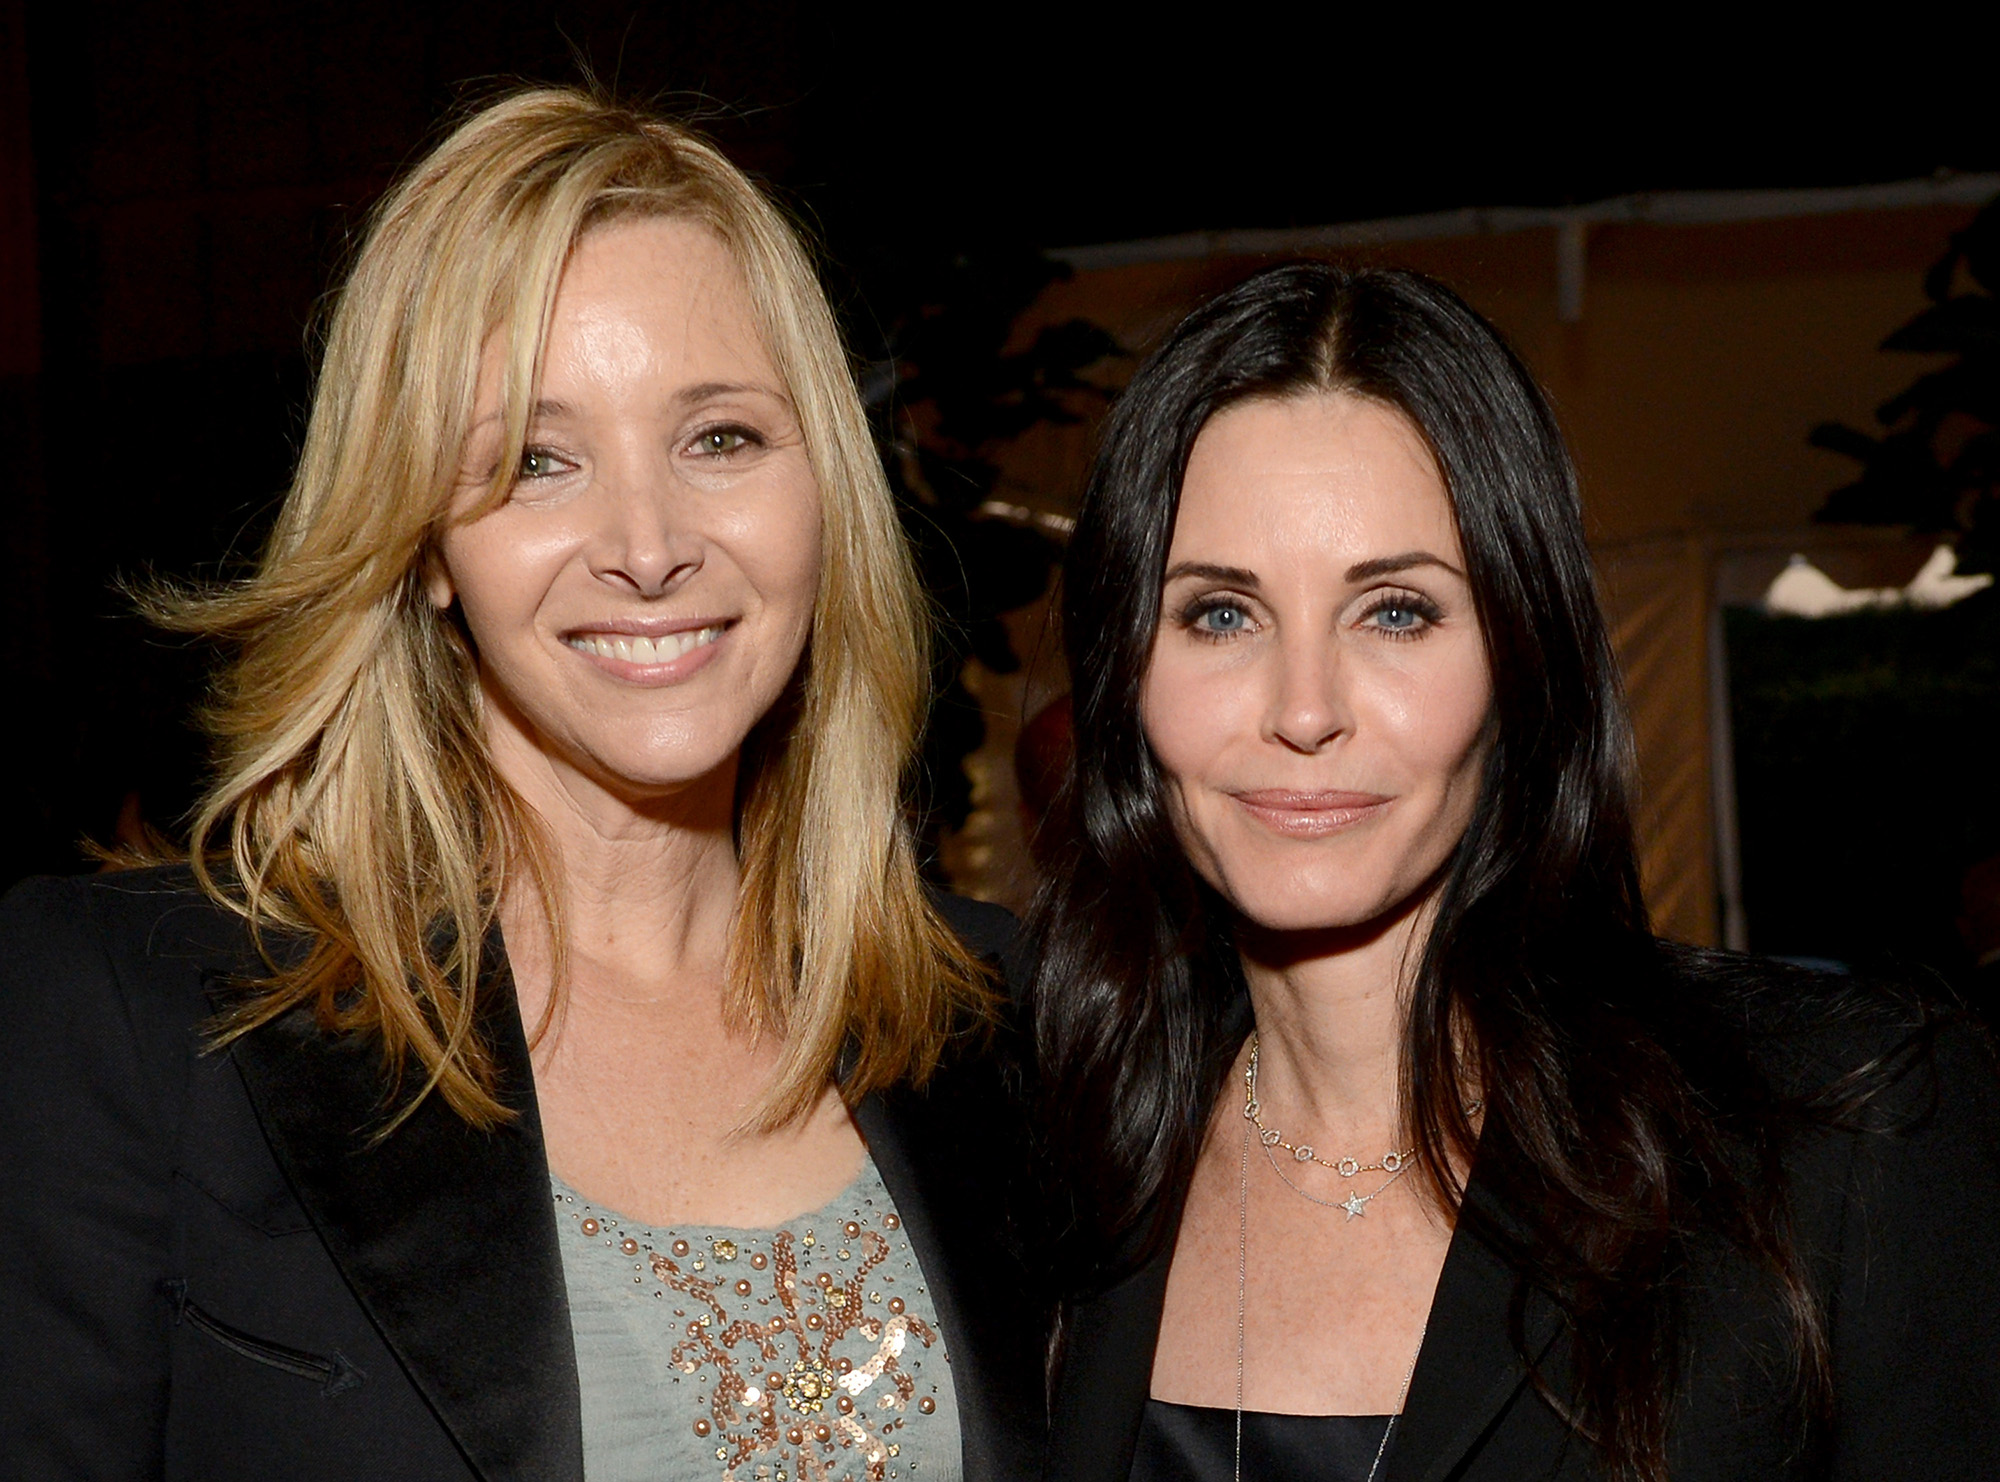 Lisa Kudrow and Courteney Cox attend LA Modernism Show on April 25, 2013 in Santa Monica, California.  (Photo by Michael Kovac/Getty Images for P.S. Arts) (Michael Kovac—Getty Images for P.S. Arts)